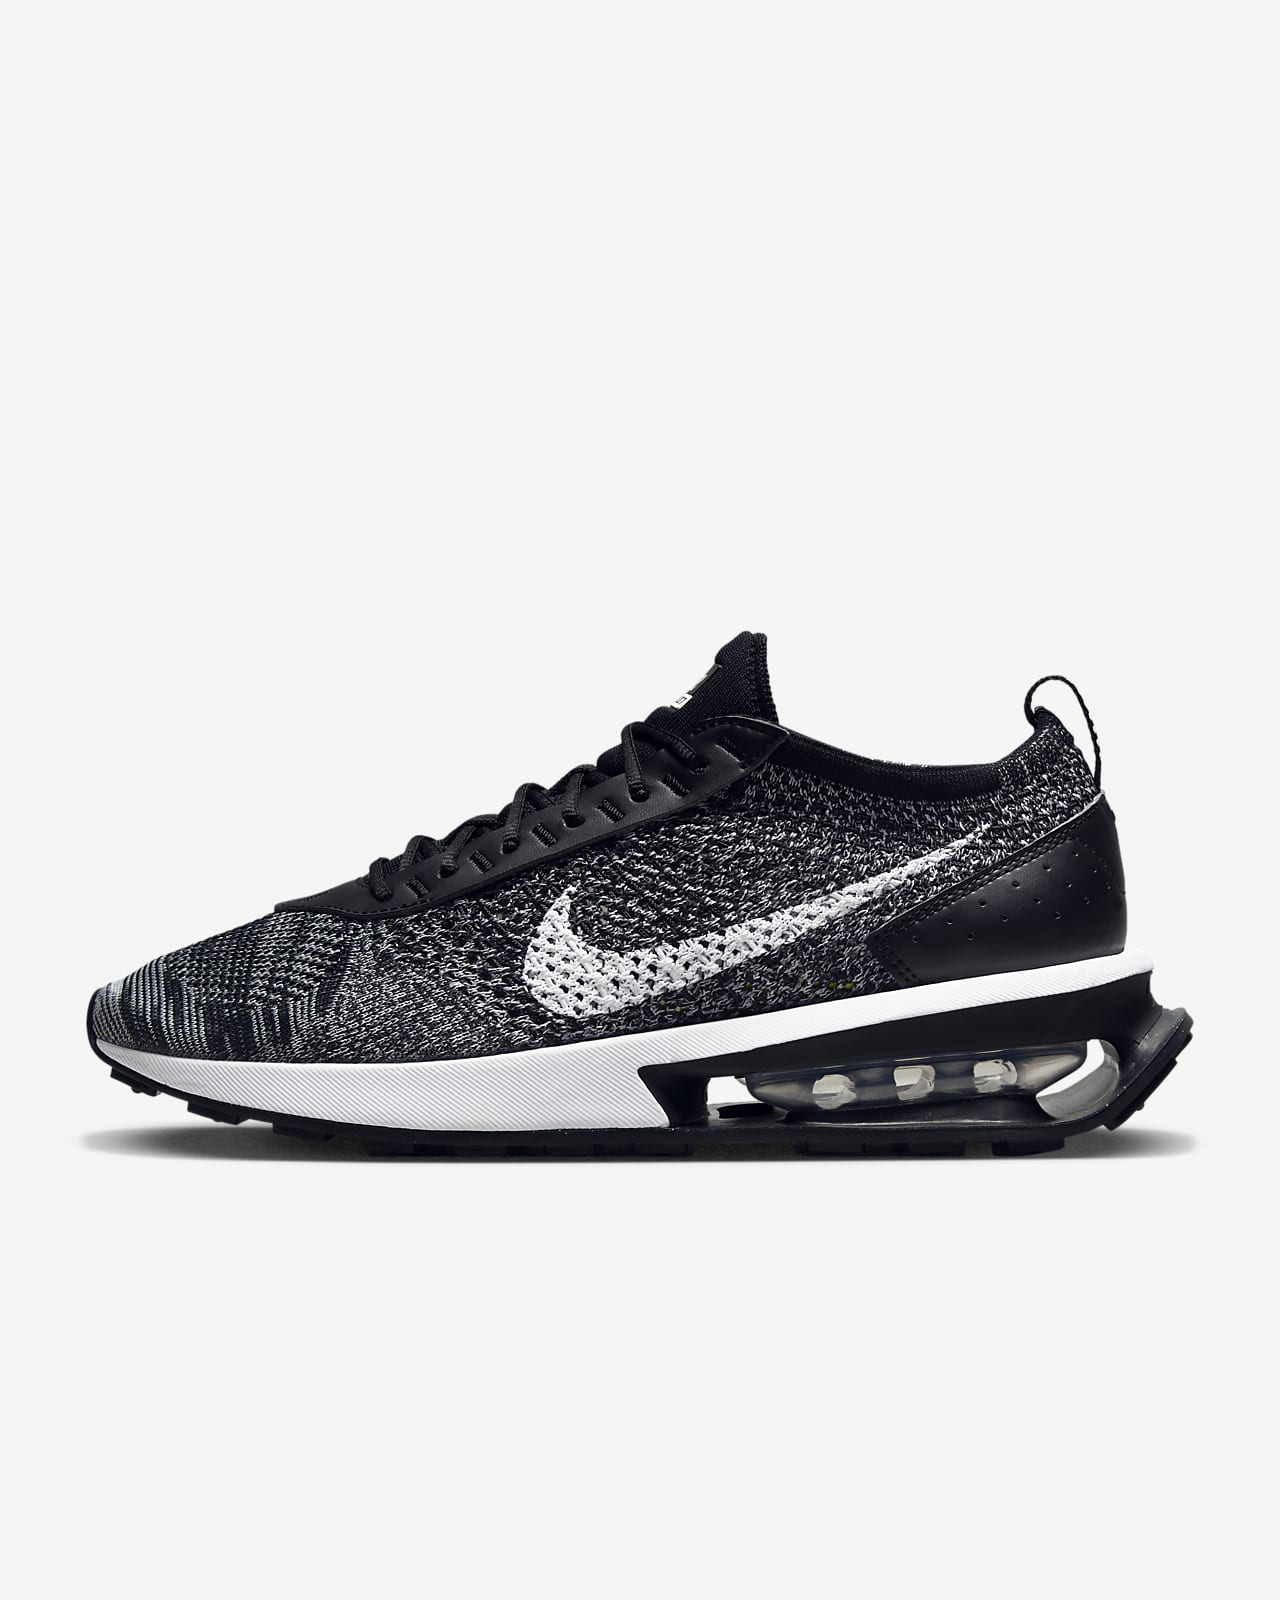 Nike Air Max Flyknit Racer Women's Shoes.